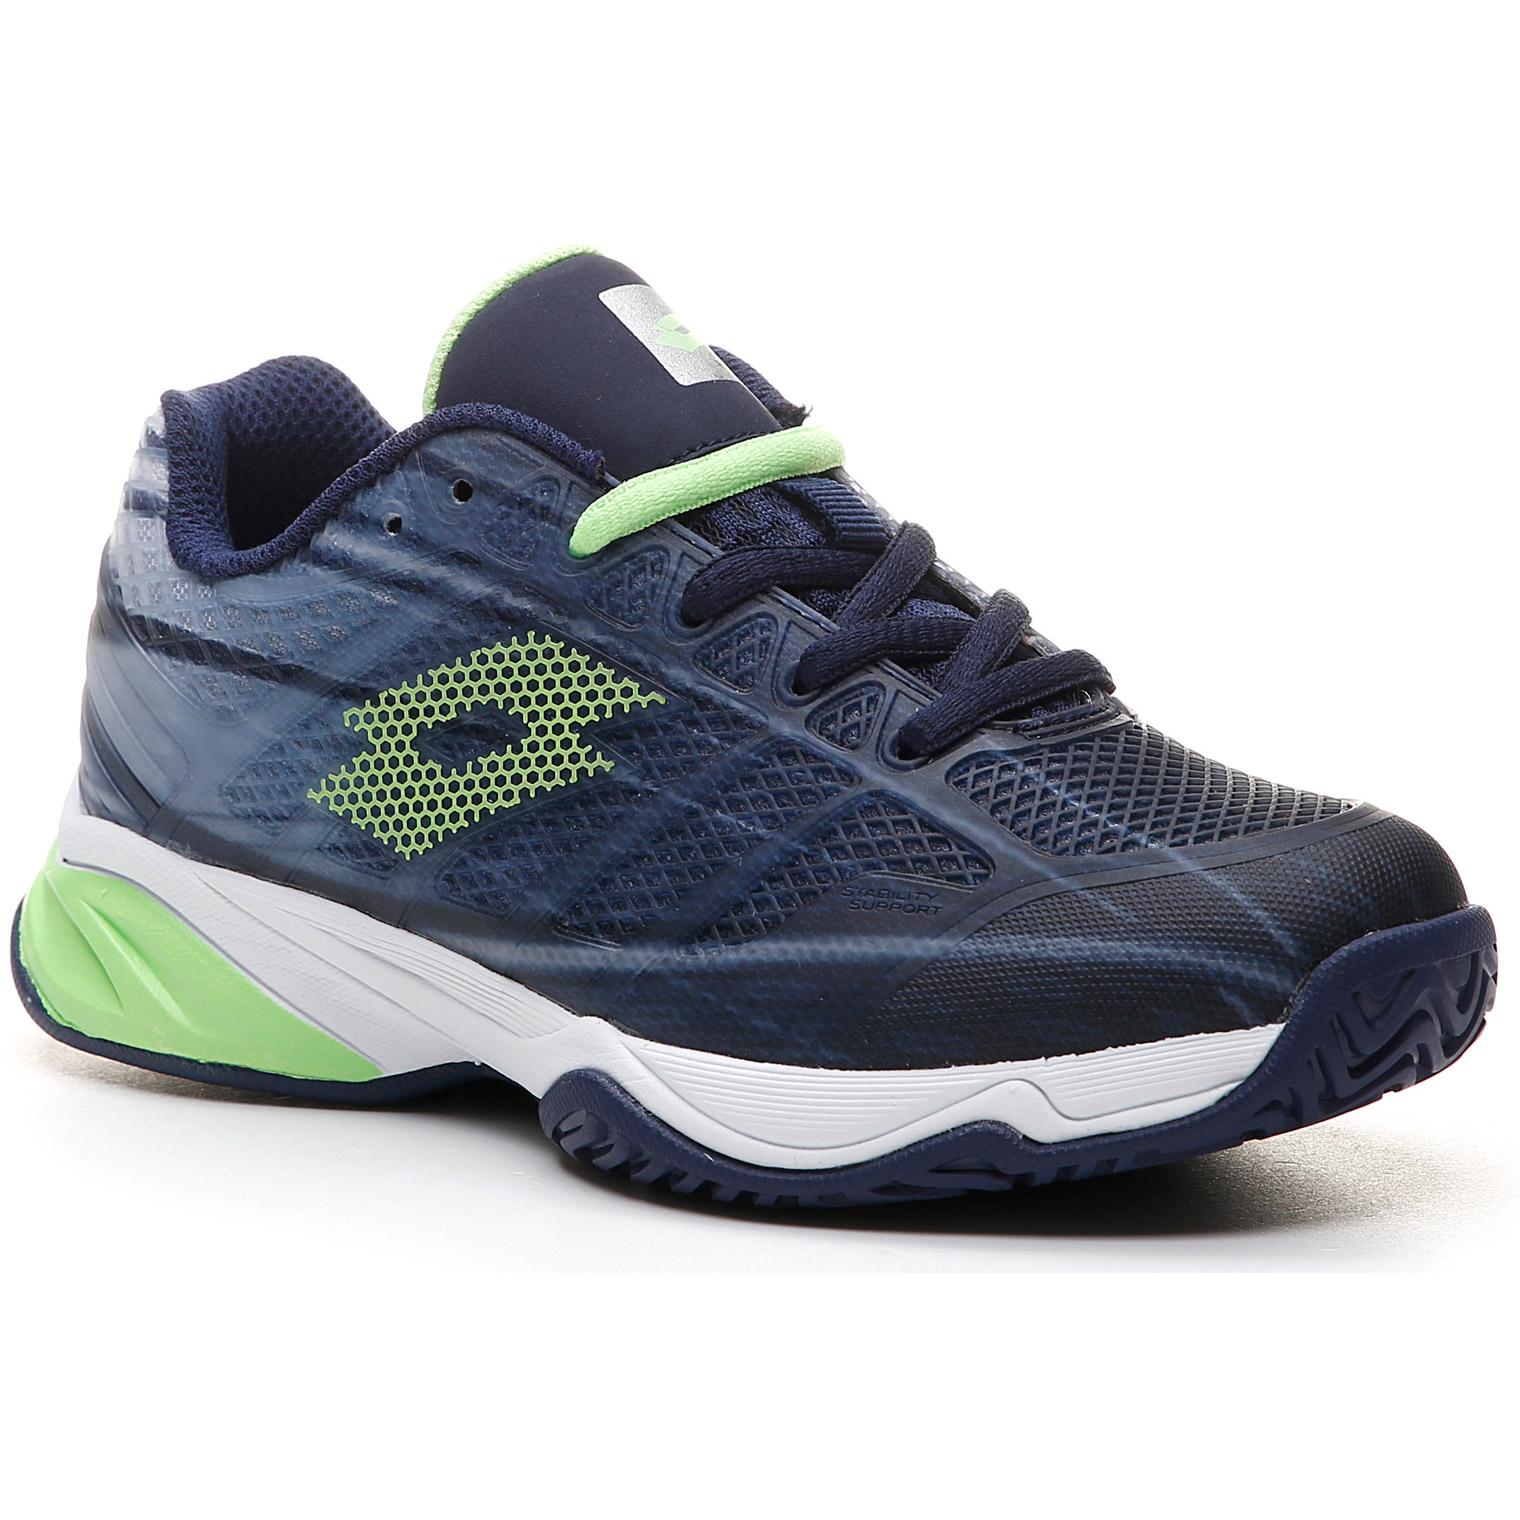 Lotto Kids Mirage 300 Tennis Shoes Navy Blue